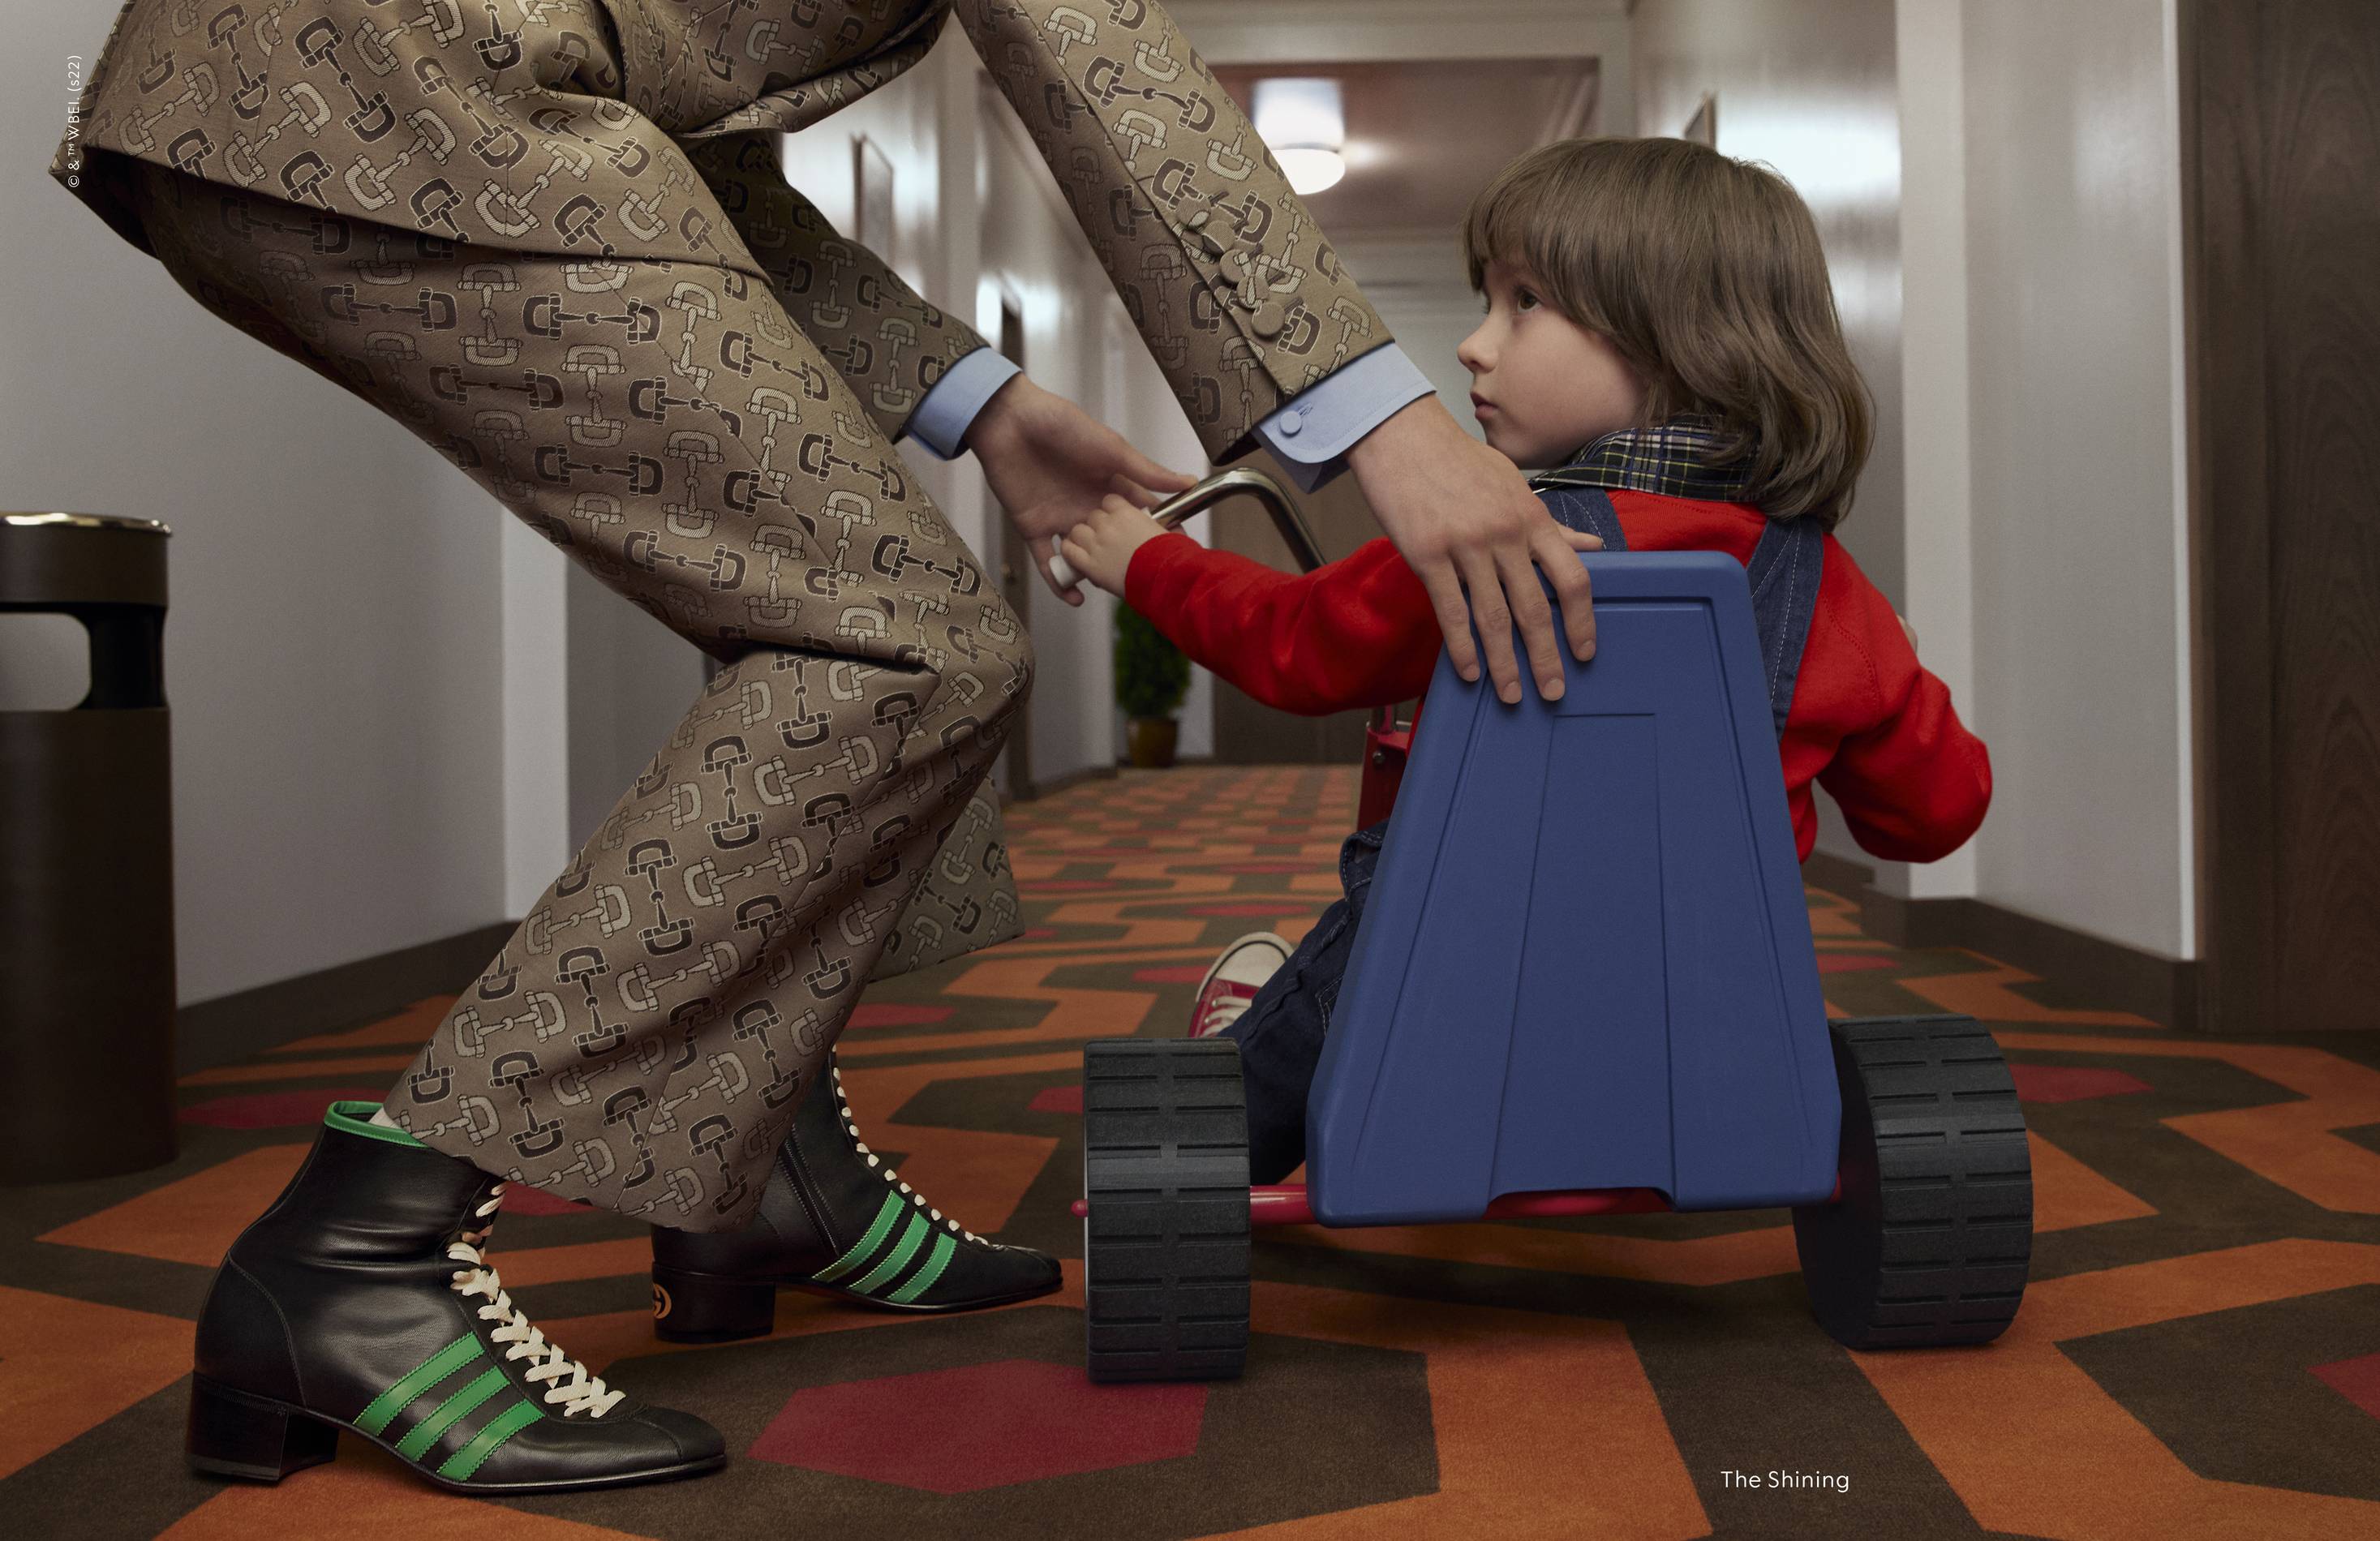 gucci x adidas exquisite campaign image still; the shining